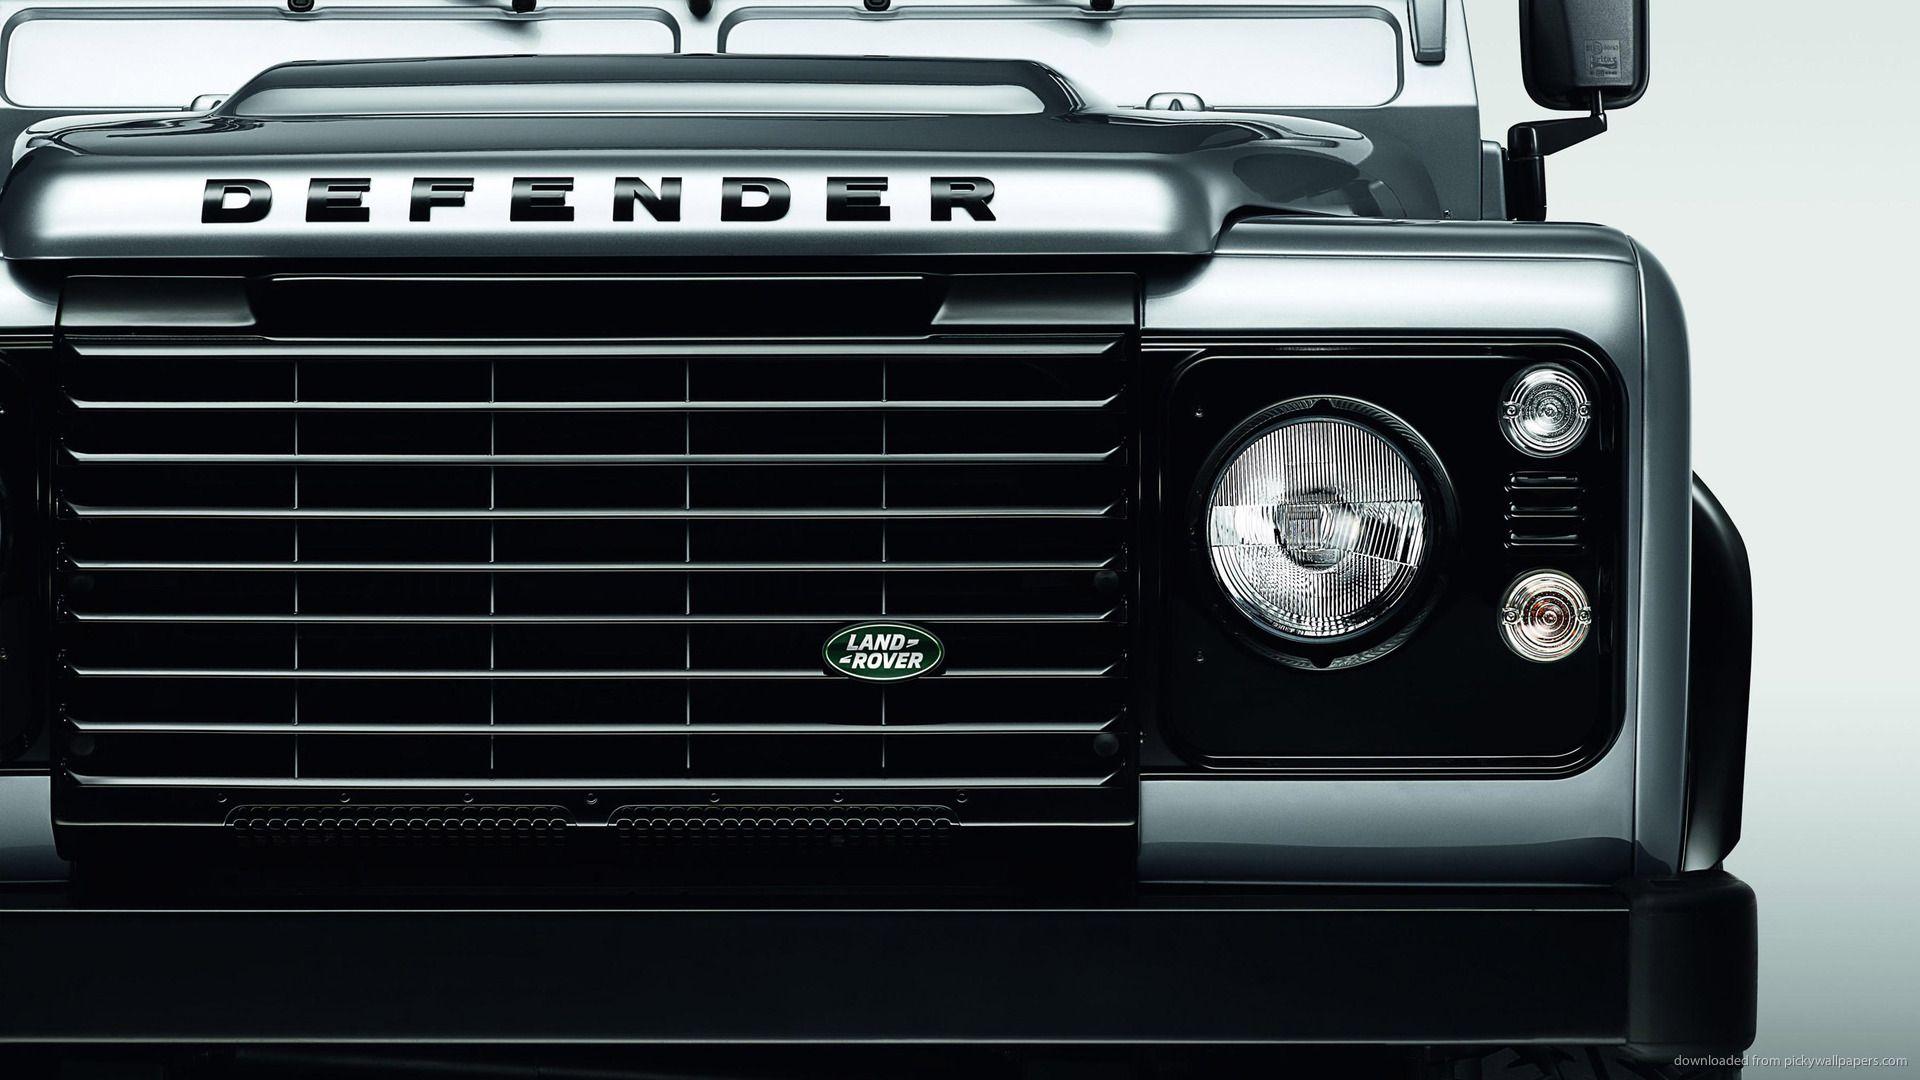 Download 1920x1080 Silver Land Rover Defender XS Radiator Grille